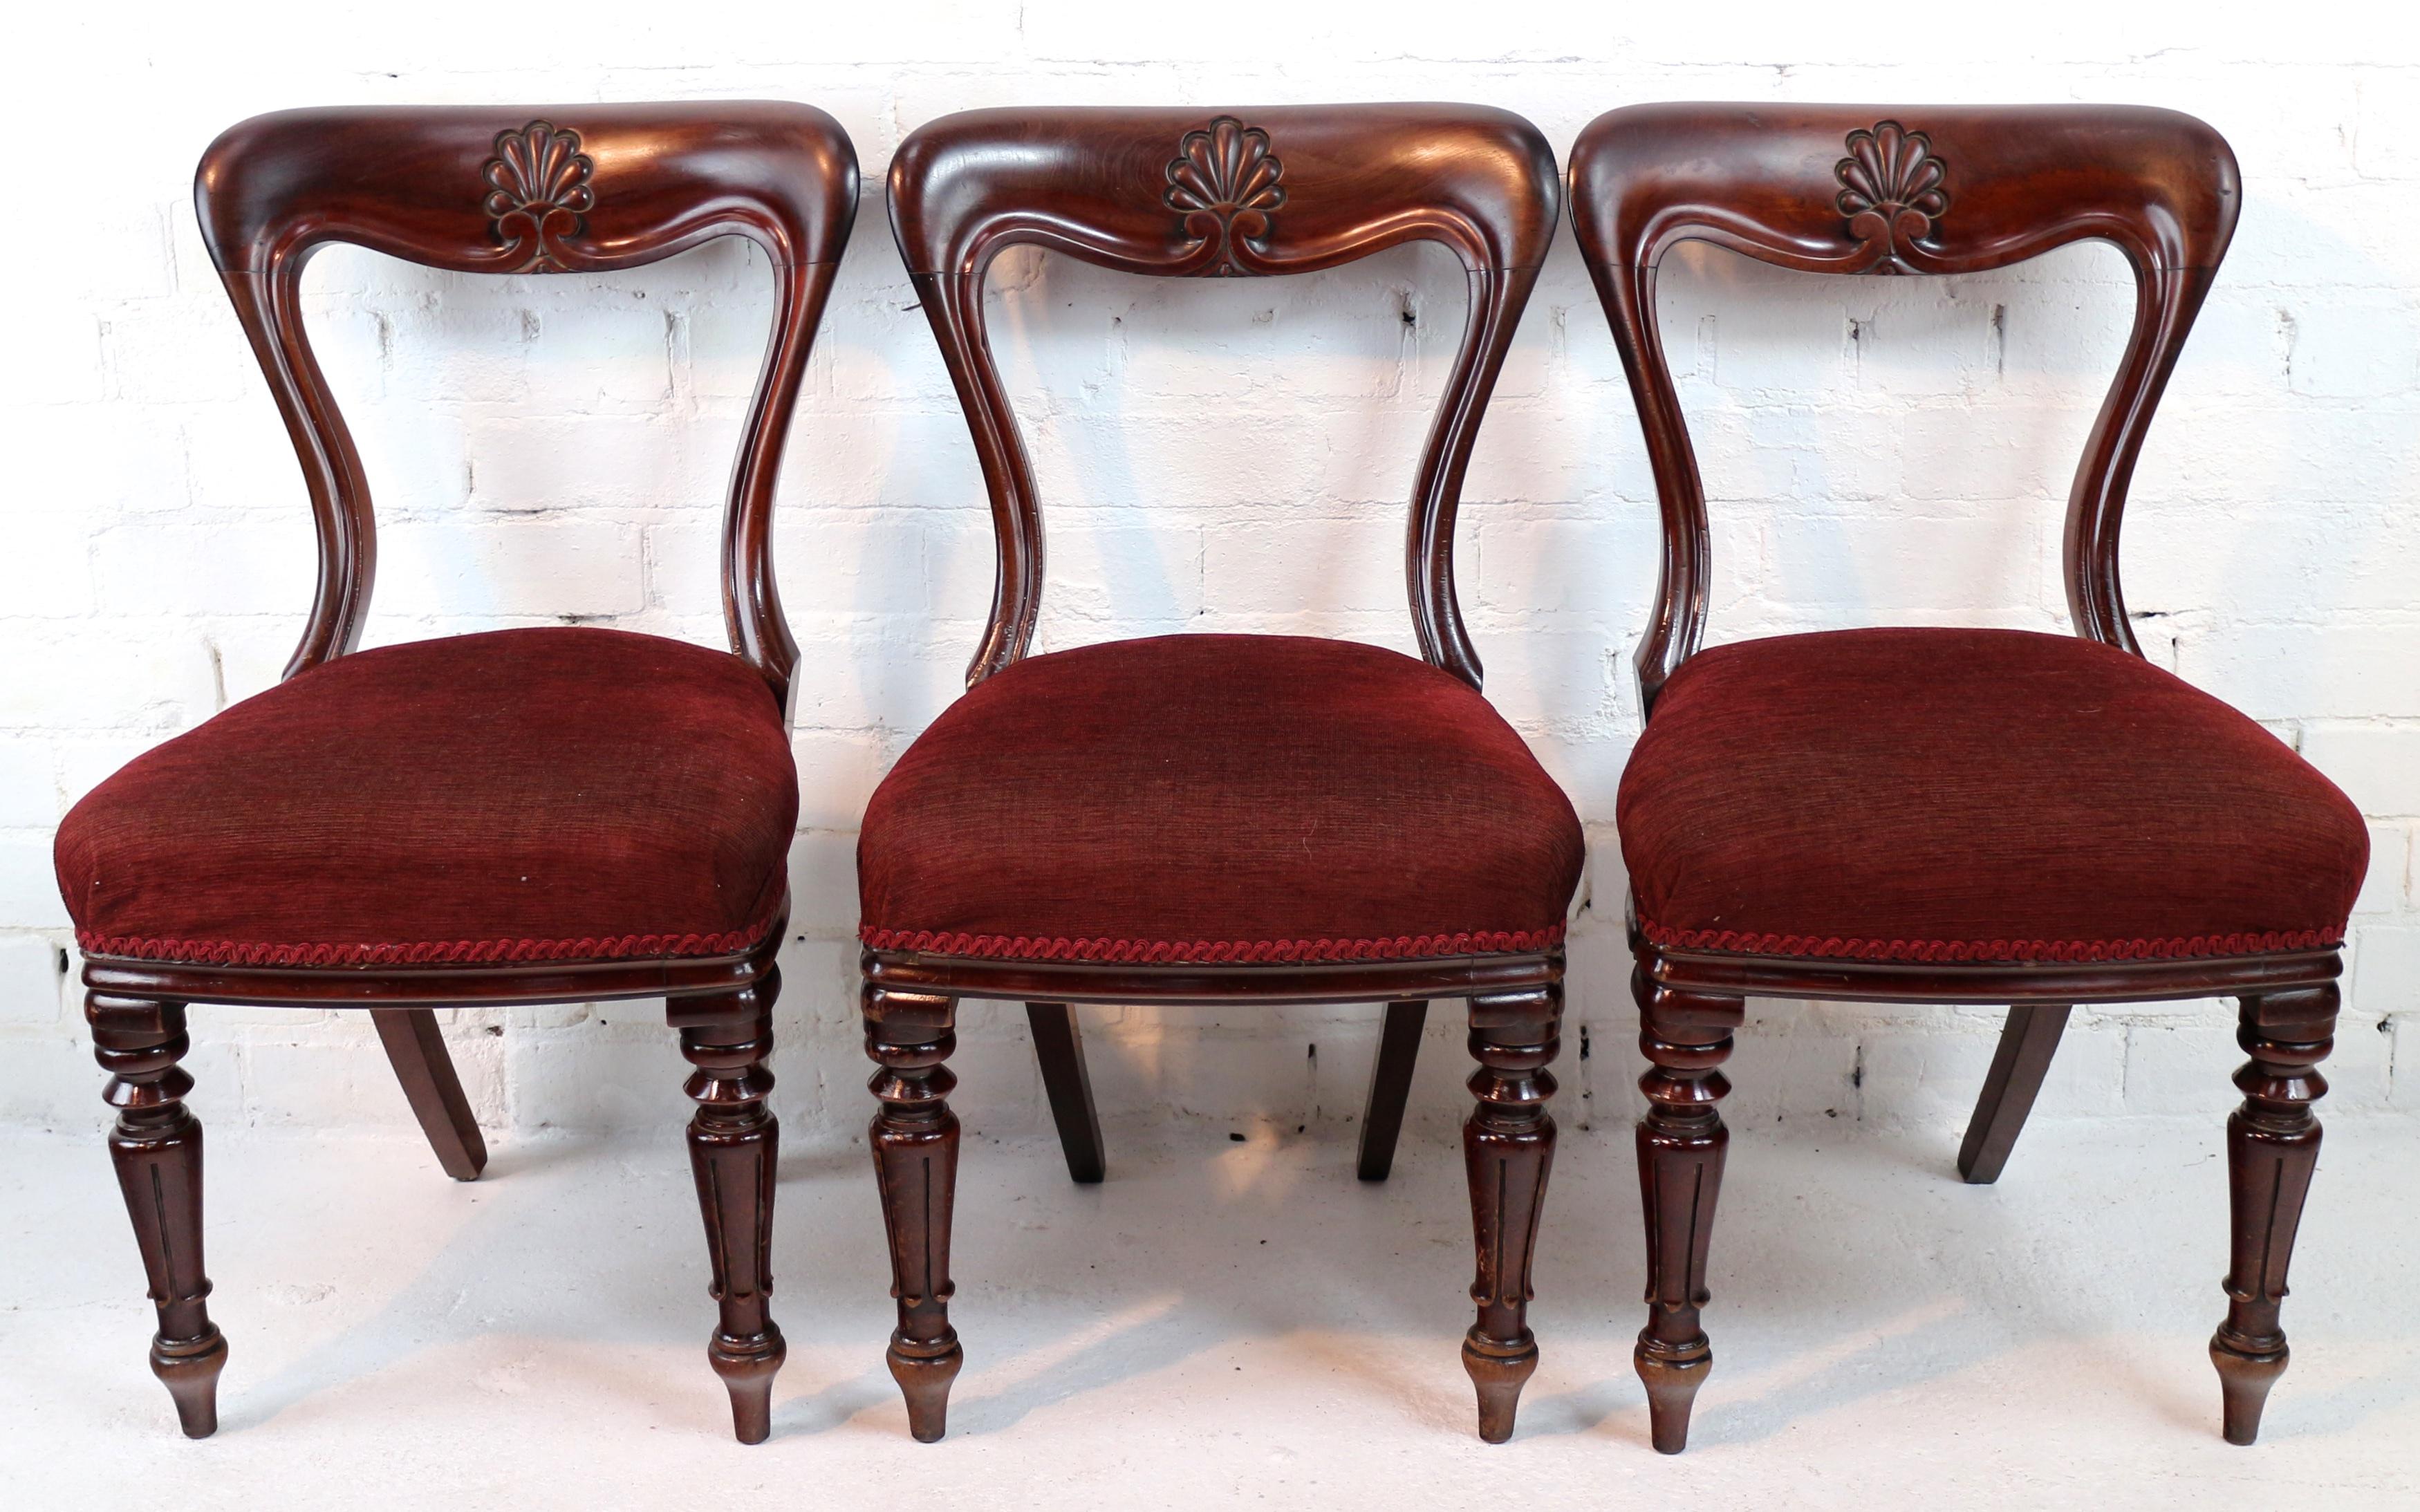 Set of 10 Antique English William IV Mahogany Dining Chairs by J Proctor For Sale 8